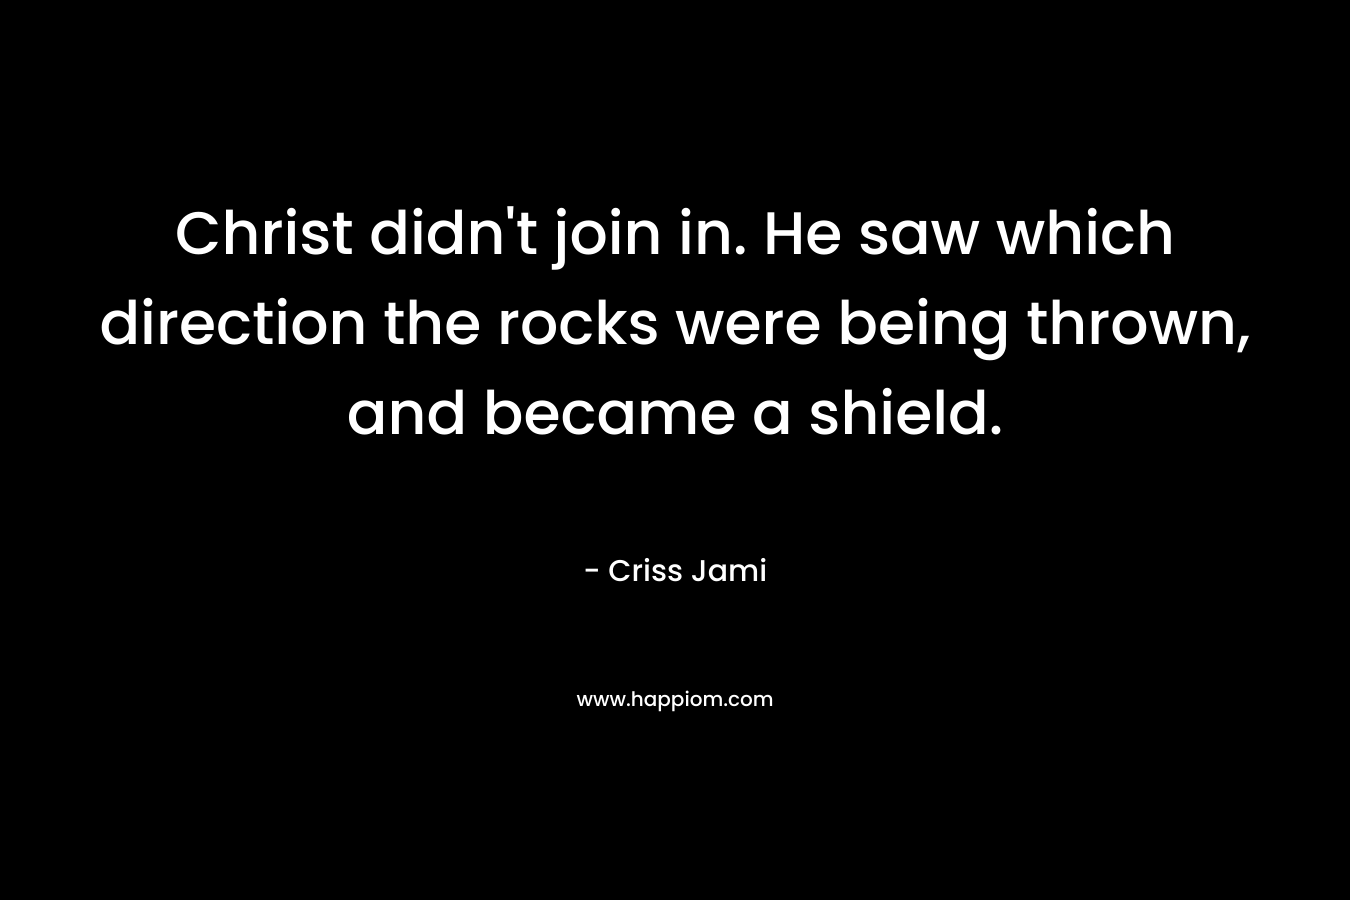 Christ didn't join in. He saw which direction the rocks were being thrown, and became a shield.